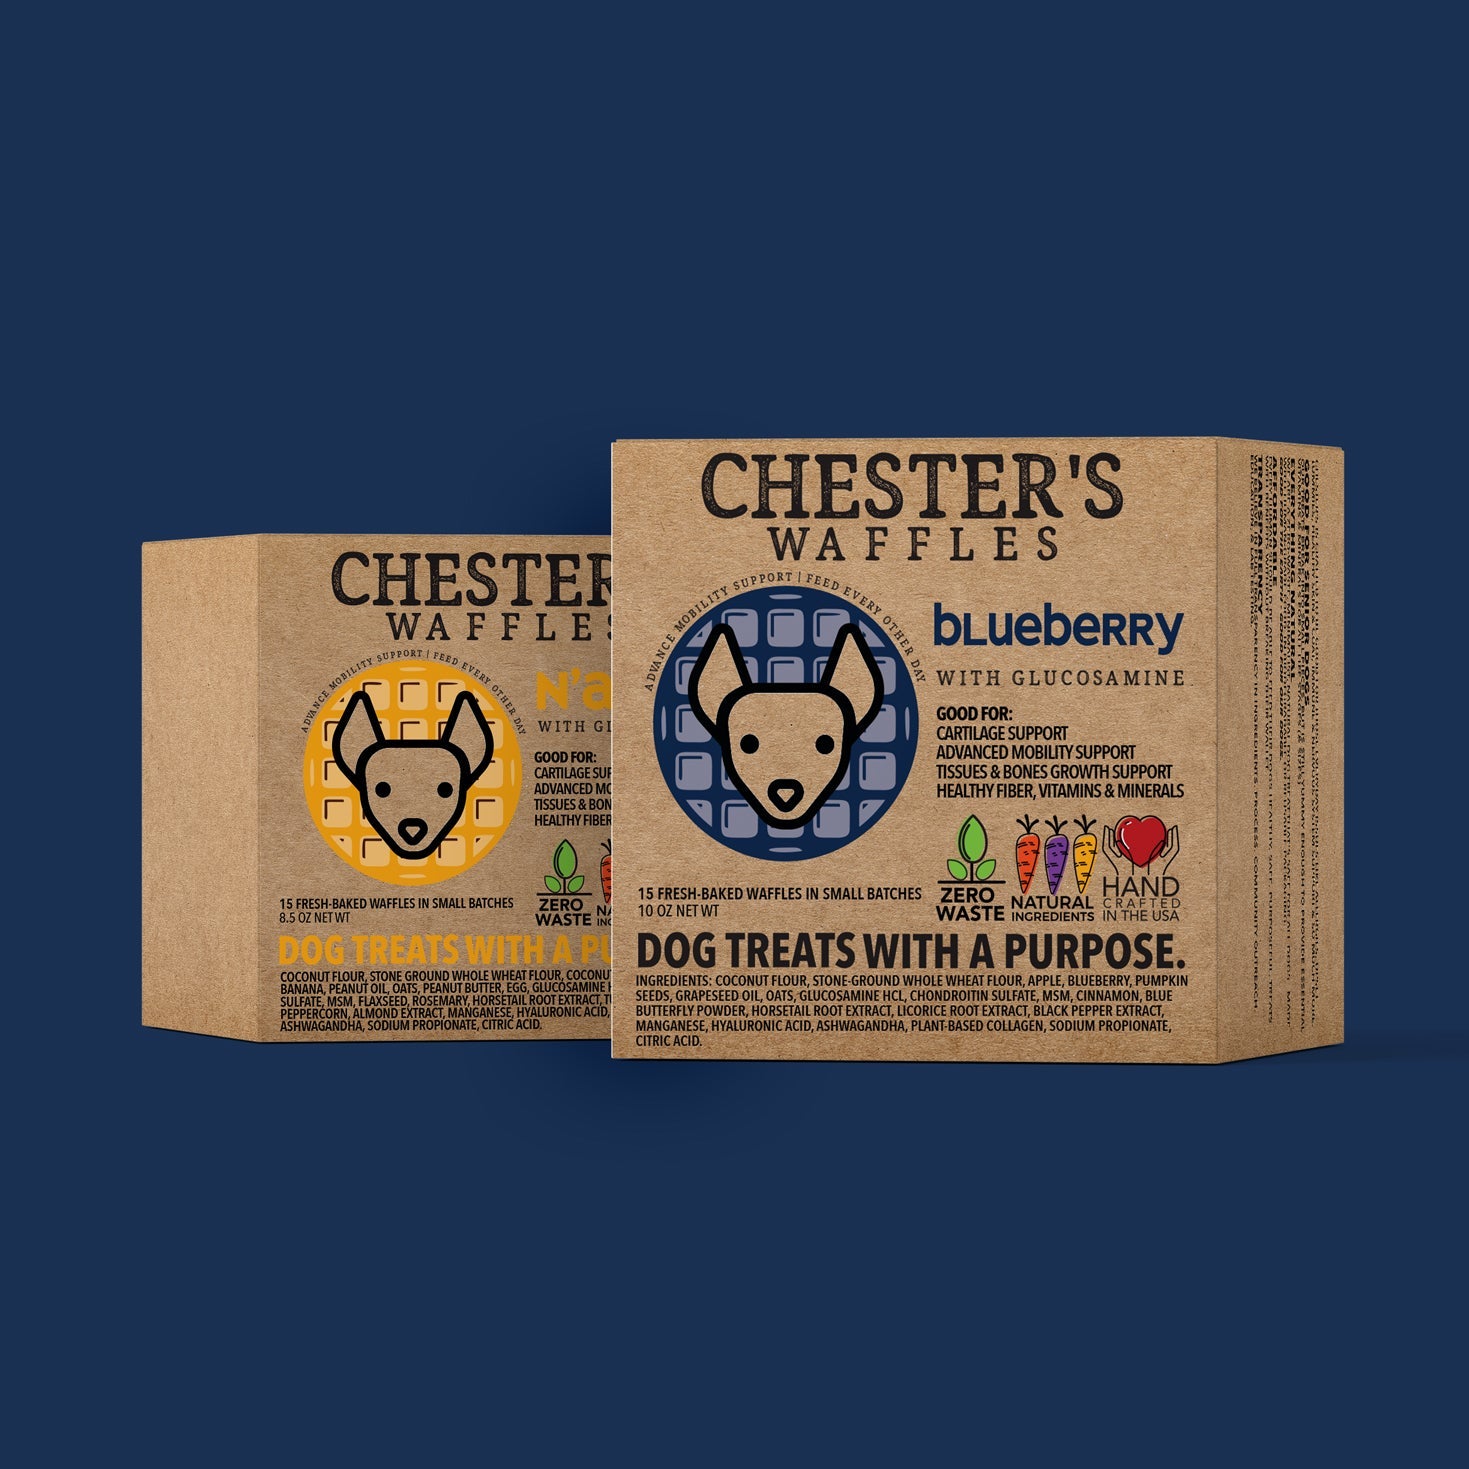 CHESTER's Super Waffles: Delicious joint support for happy dogs! Glucosamine, chondroitin, hyaluronic acid. Natural, human-grade, all pups. Treat their mobility!